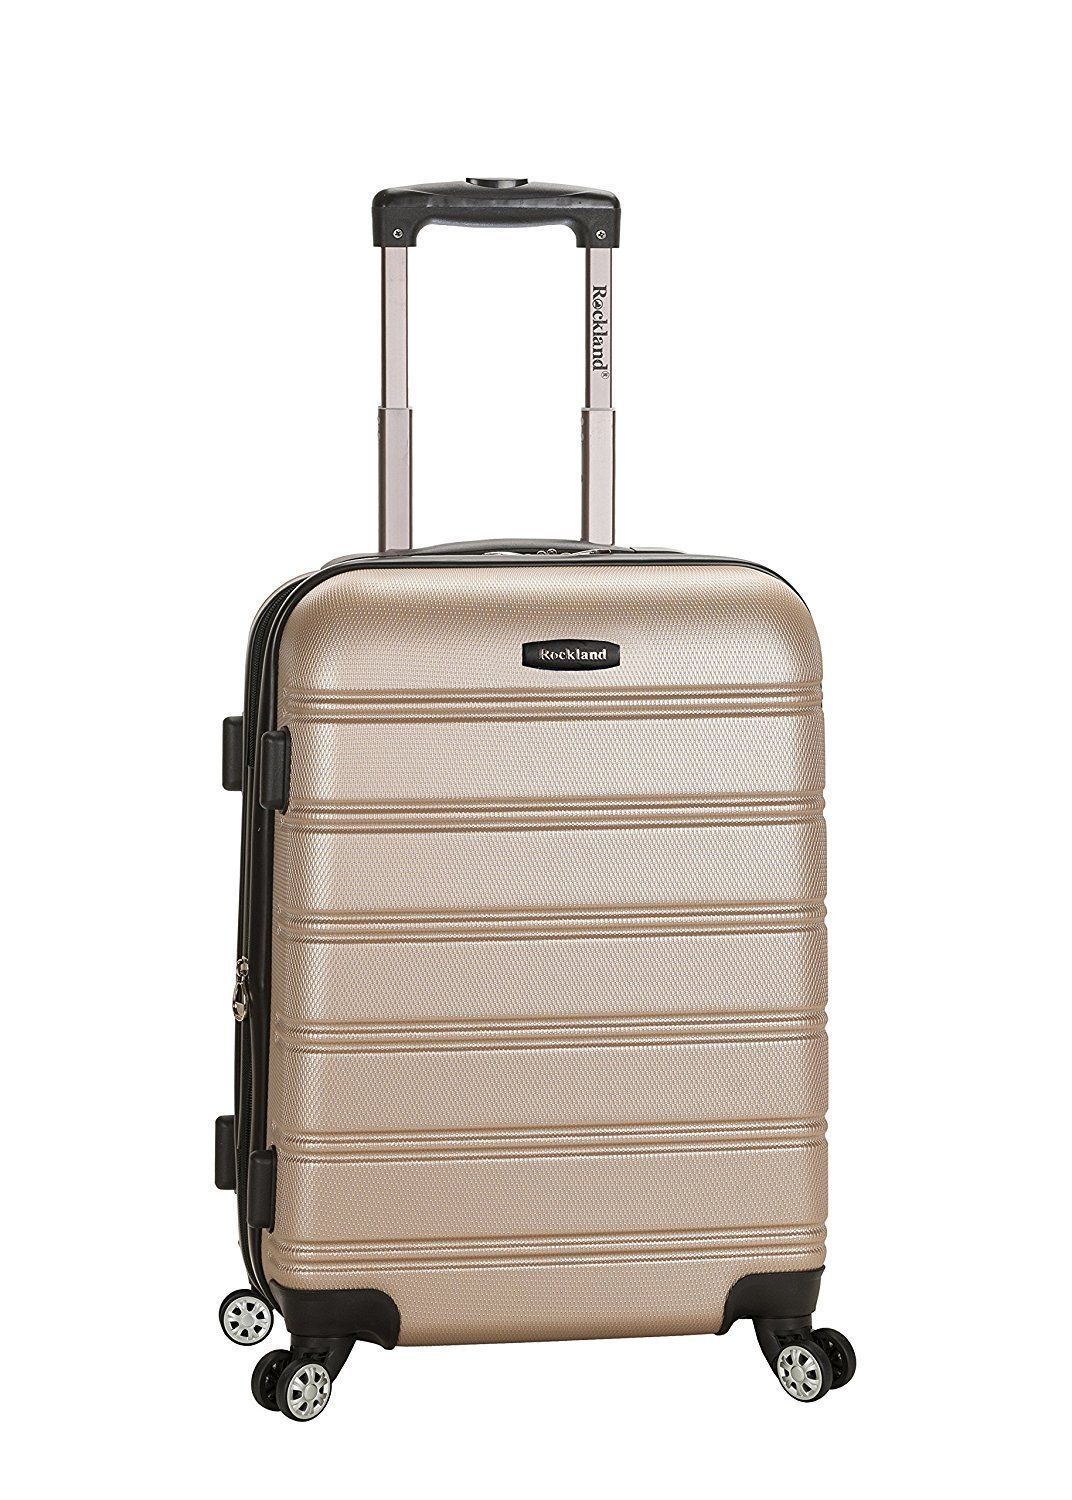 Rockland Luggage 20Inch Expandable Carry On-Travel,Clothes,Tickets,Airlines,Gear - $58.49